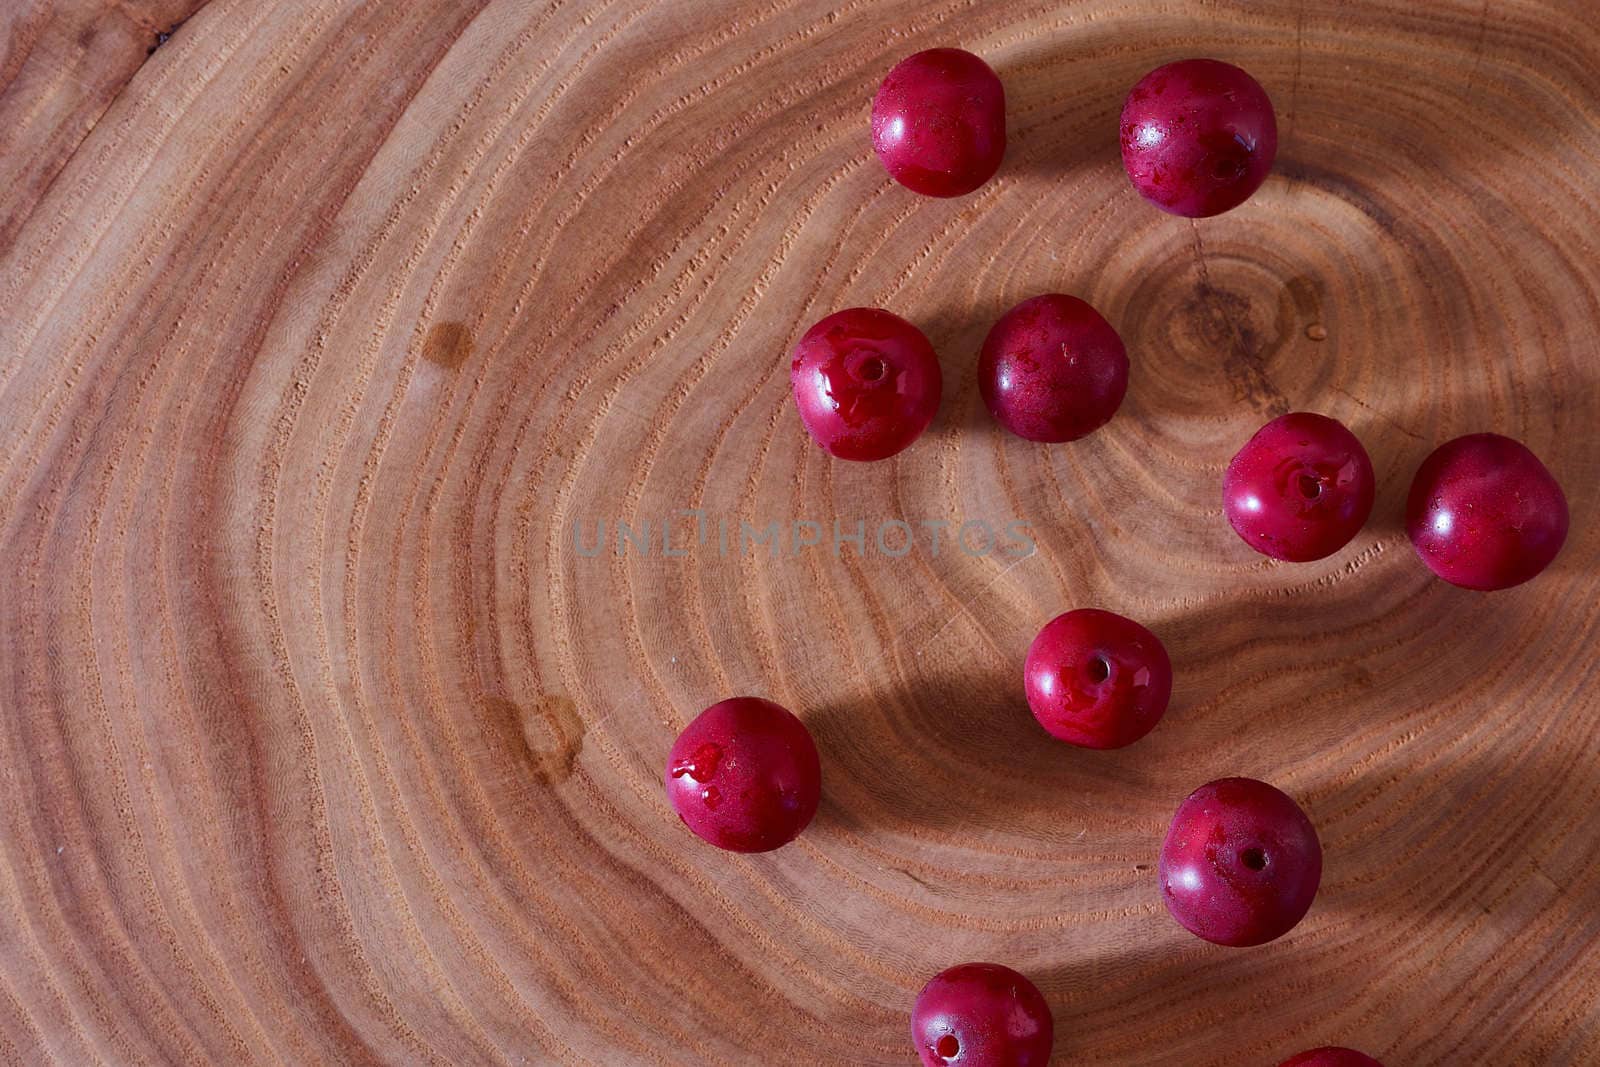 Ripe cherry berry on a wooden slice of wood. High quality photo